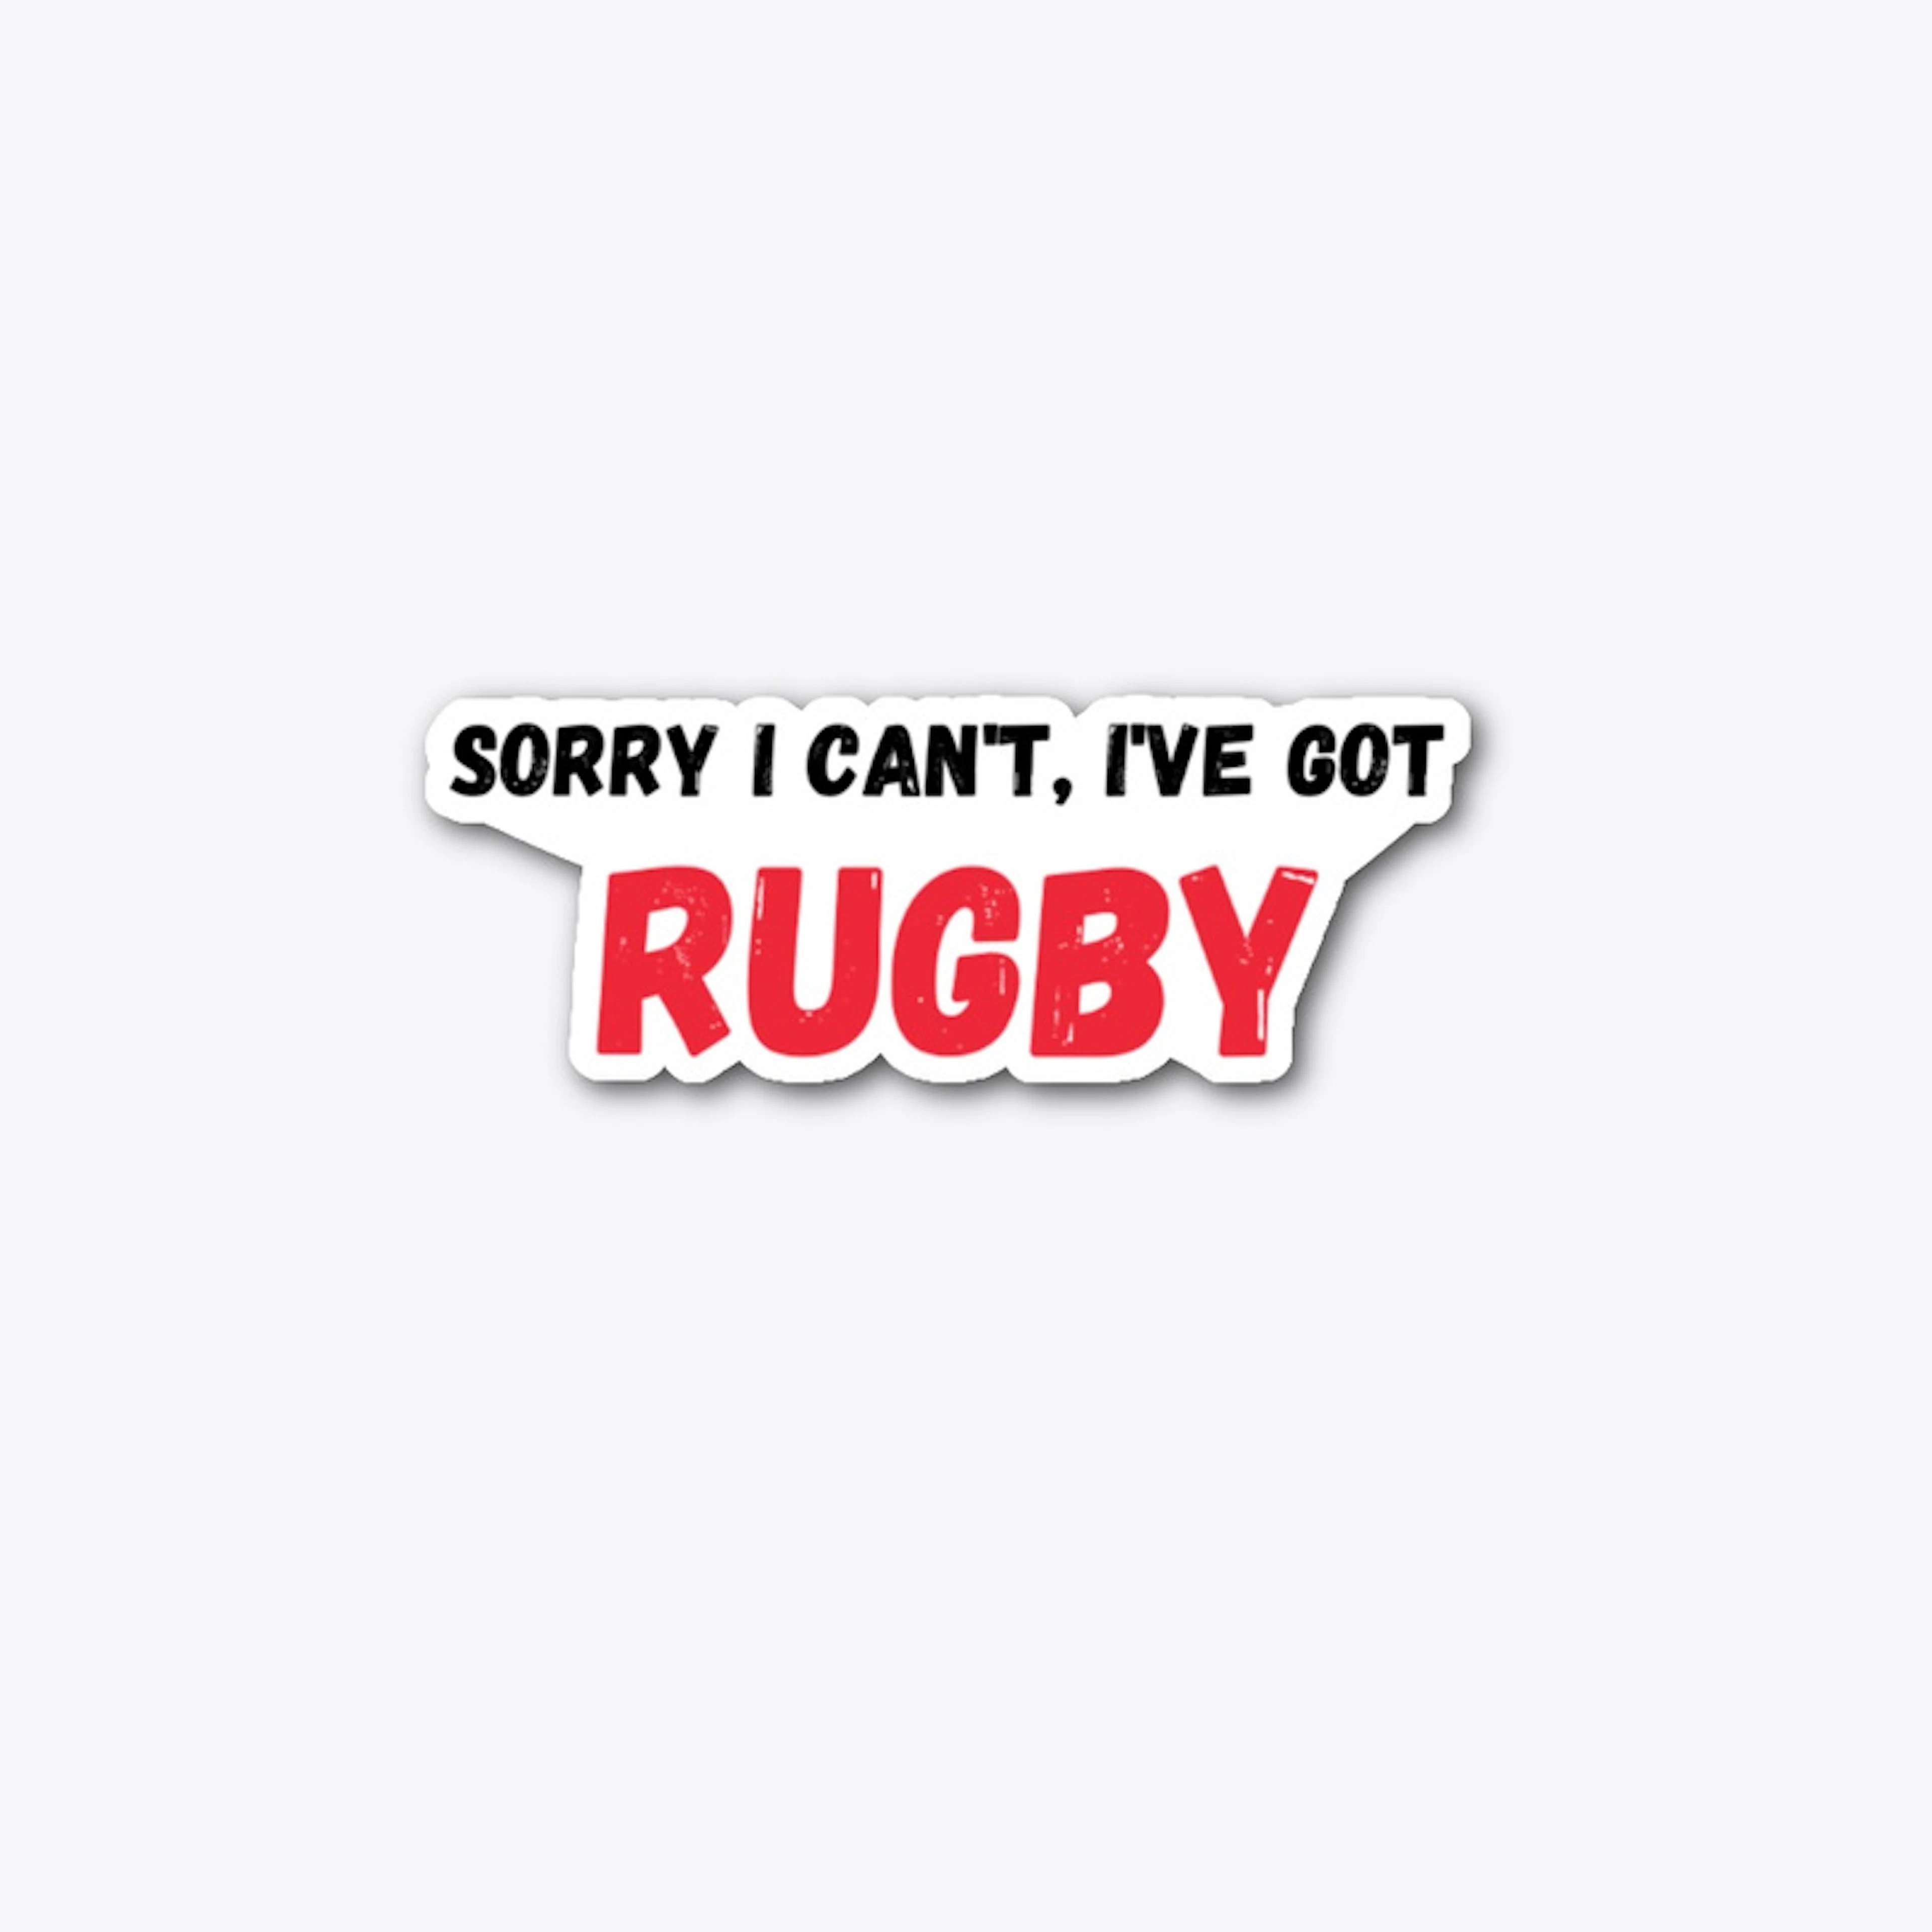 Sorry I can't, I've got Rugby